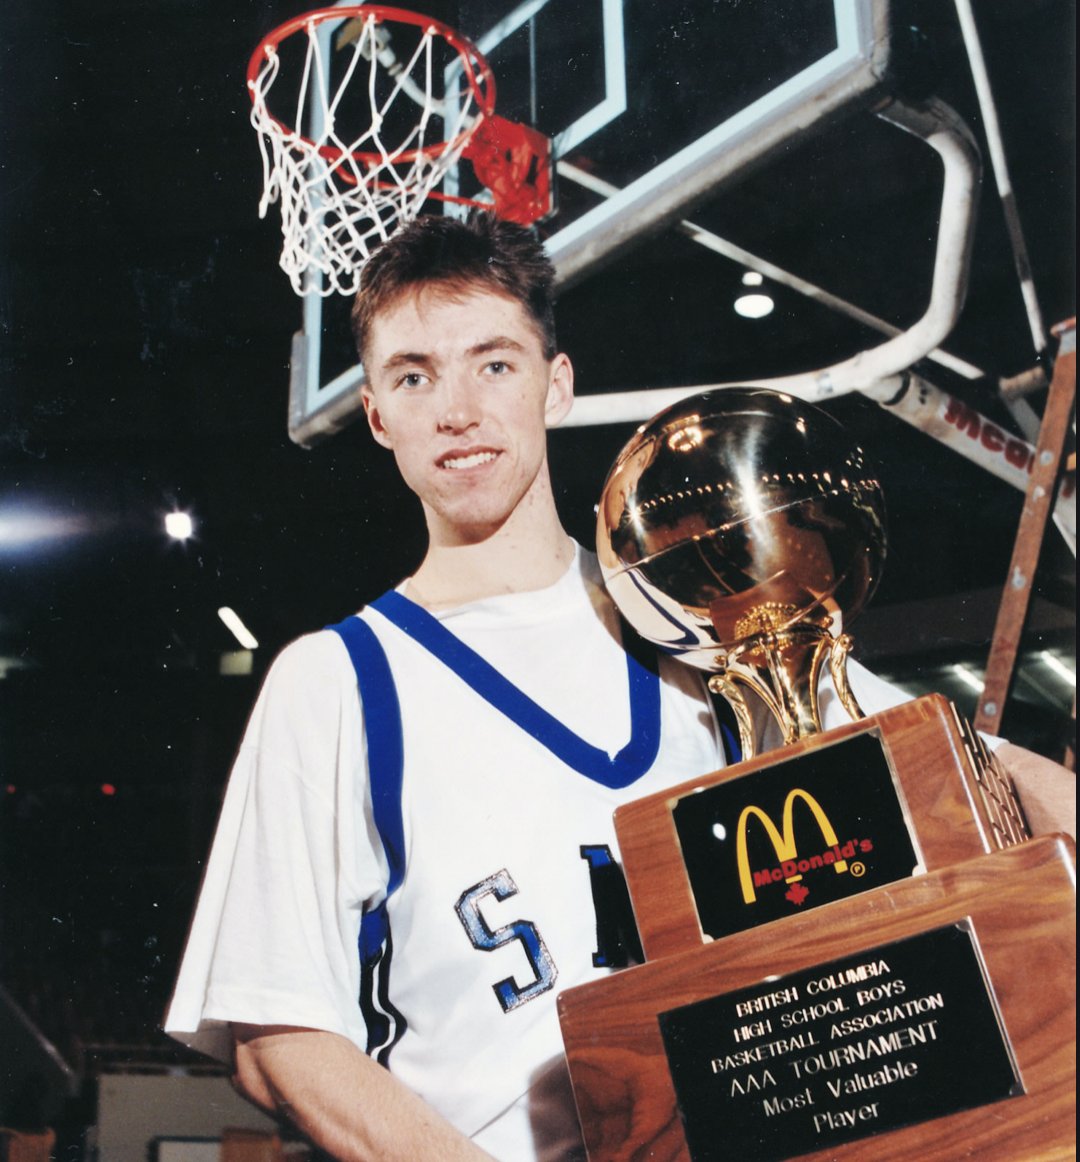 4) Throughout high school, Steve Nash progressively got better at basketball.During his senior year, Nash averaged 21 points, 11 assists and 9 rebounds.Despite averaging a near triple double, the scholarship offers didn't roll in.